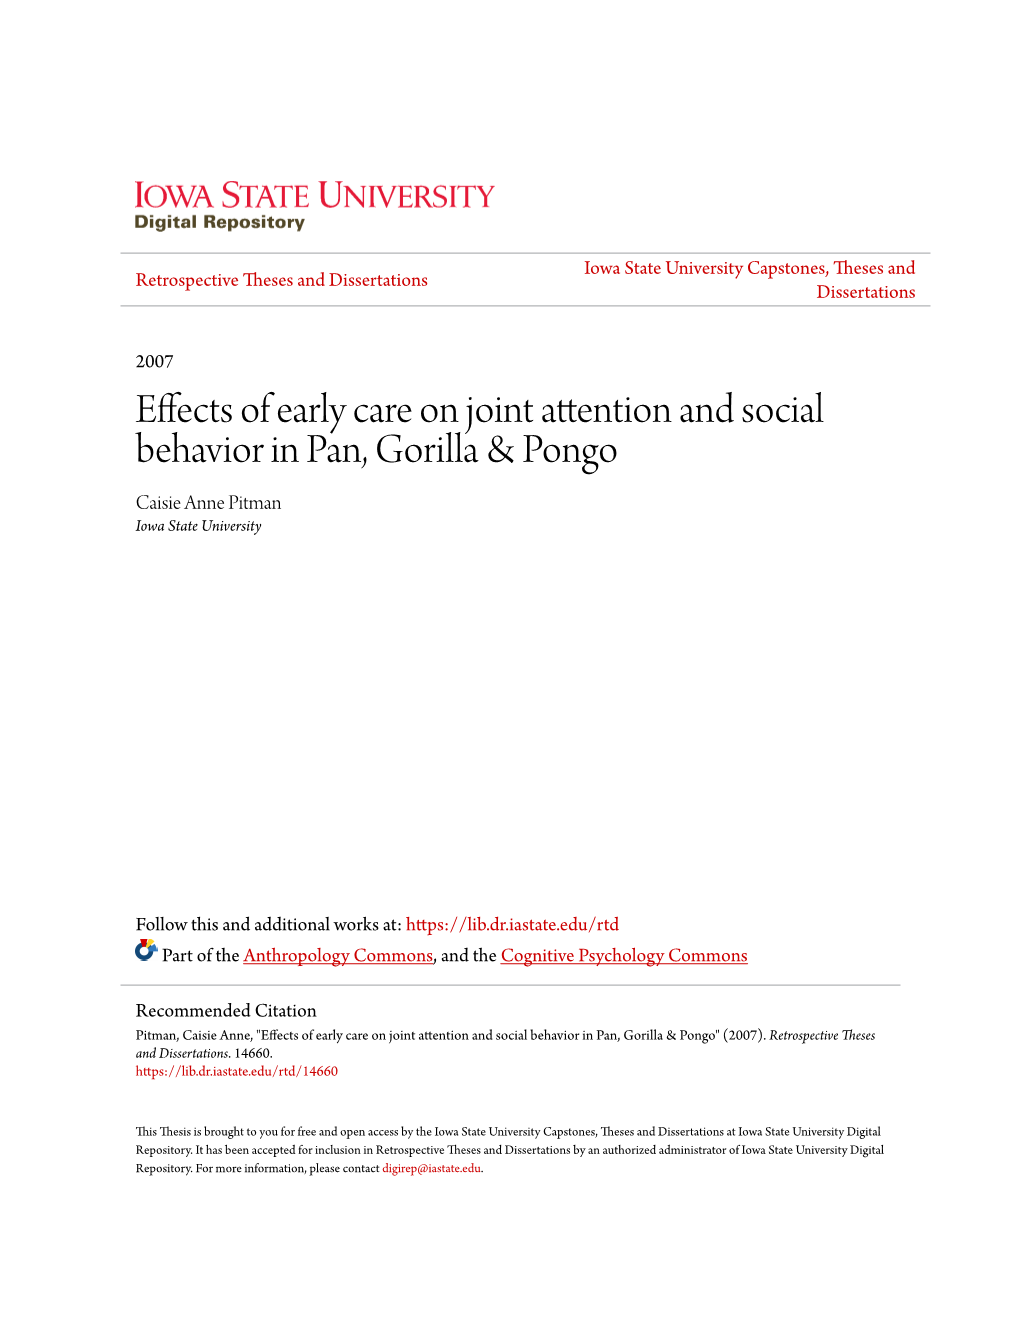 Effects of Early Care on Joint Attention and Social Behavior in Pan, Gorilla & Pongo Caisie Anne Pitman Iowa State University